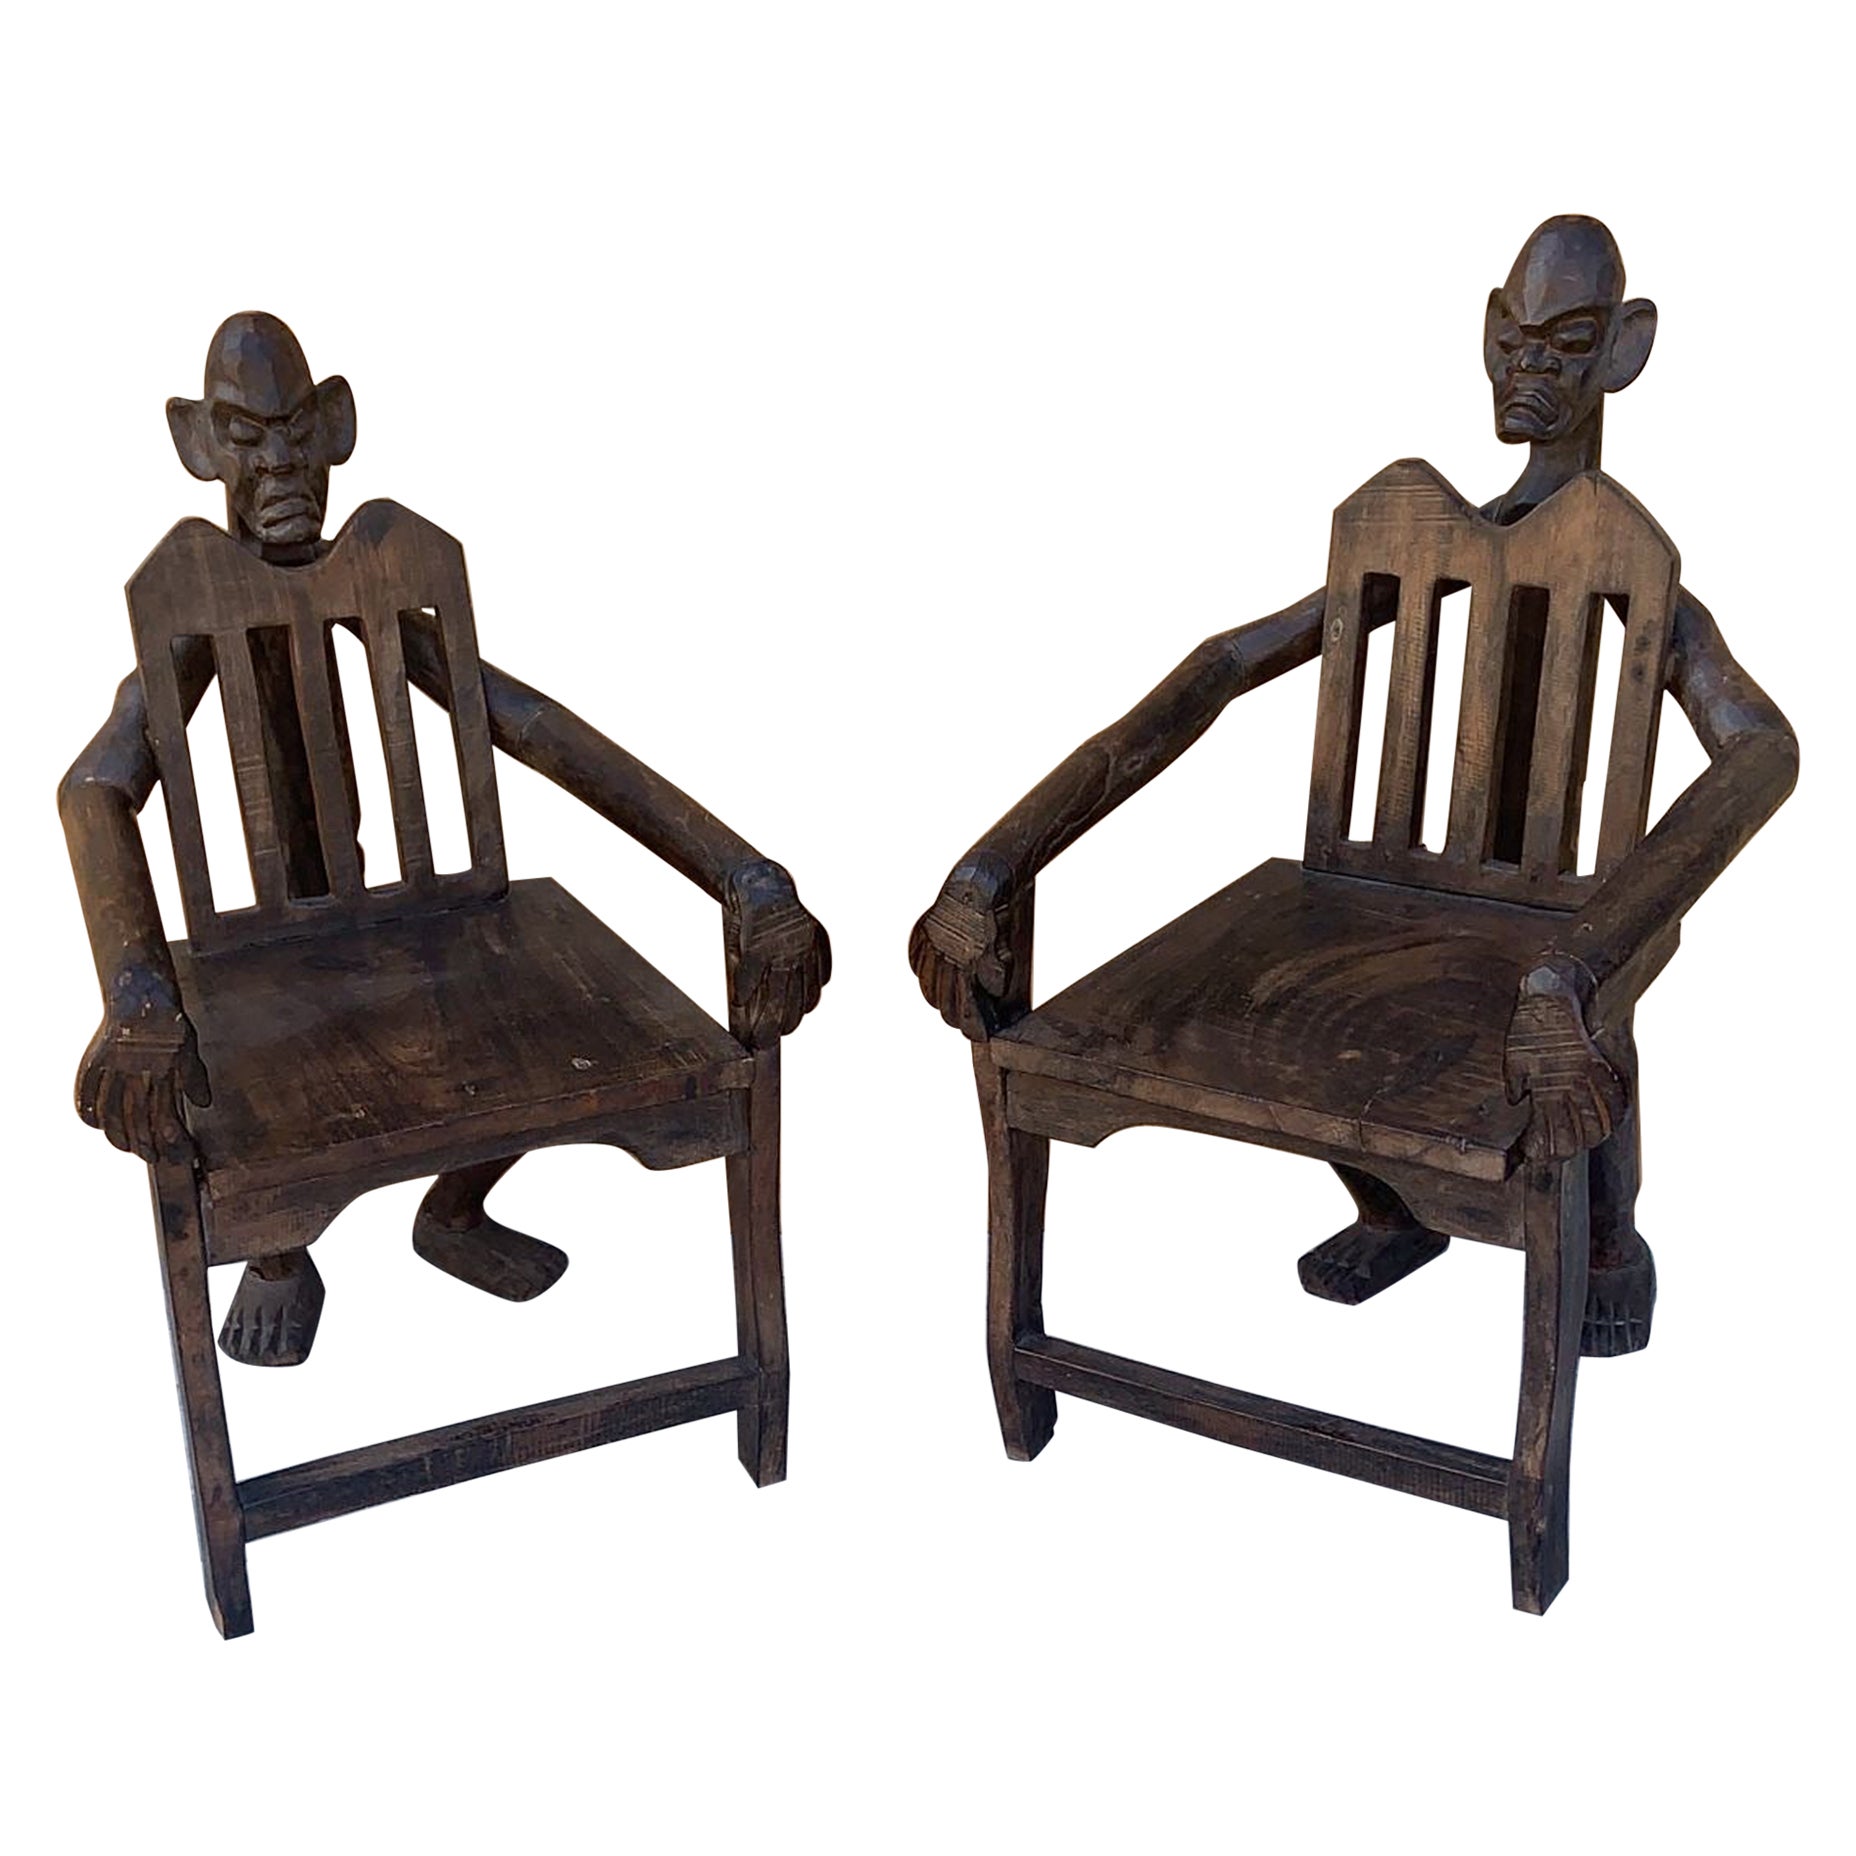 Antique African Tribal Figural Carved Armchairs - Set of 2 For Sale